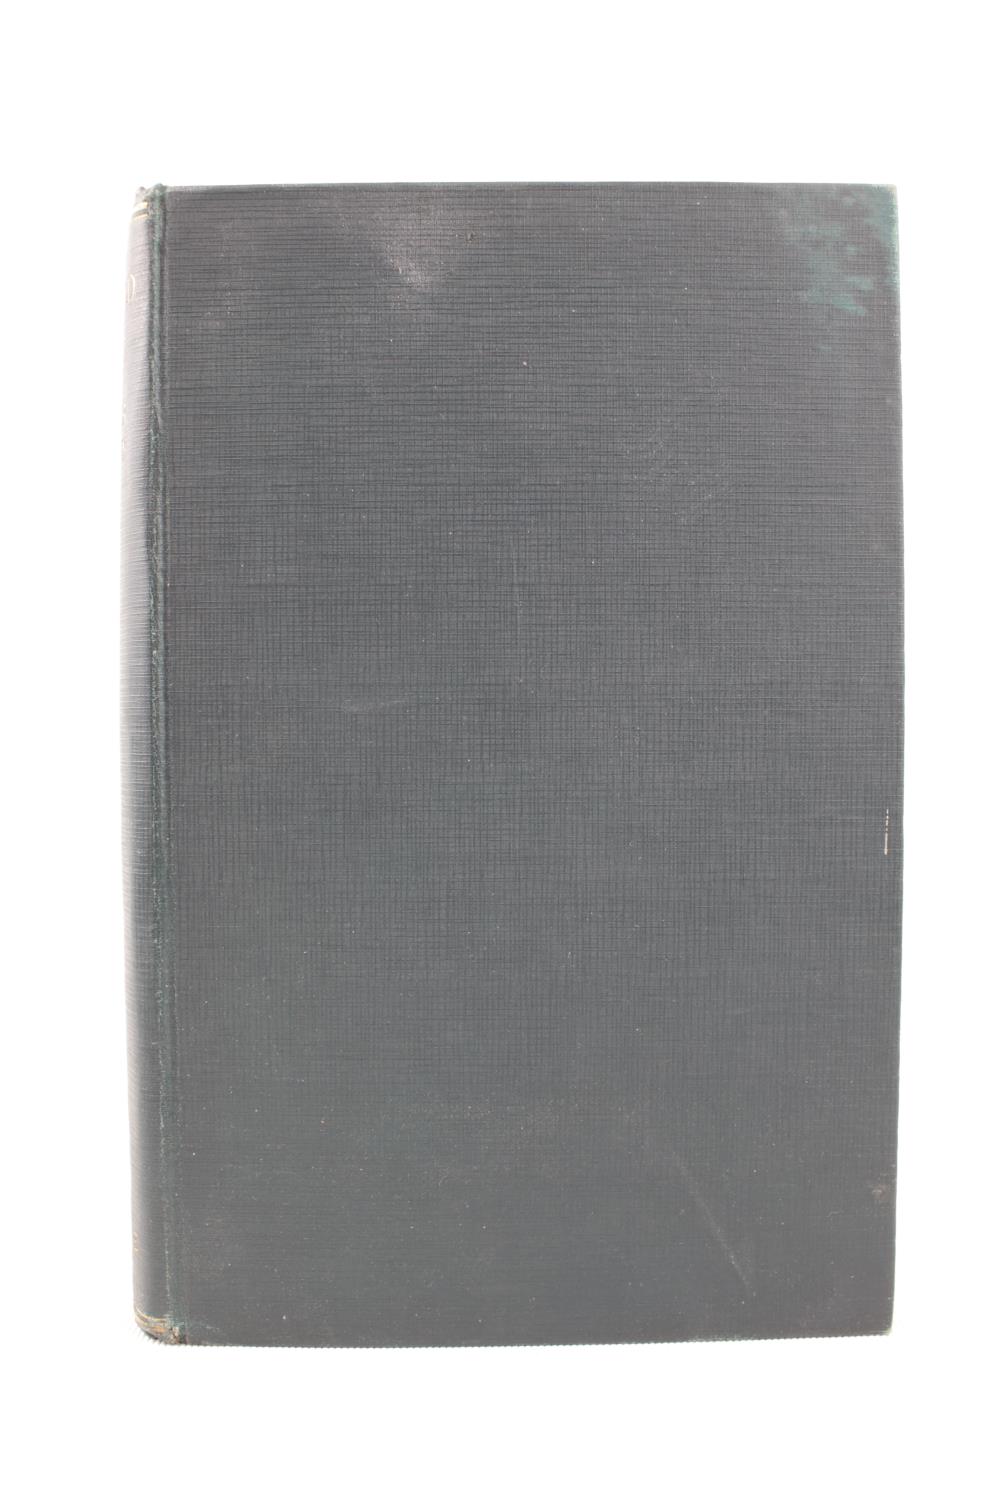 Moonchild by Aleister Crowley.First edition. Mandrake Press, London 1929. A lovely first edition - Image 2 of 4